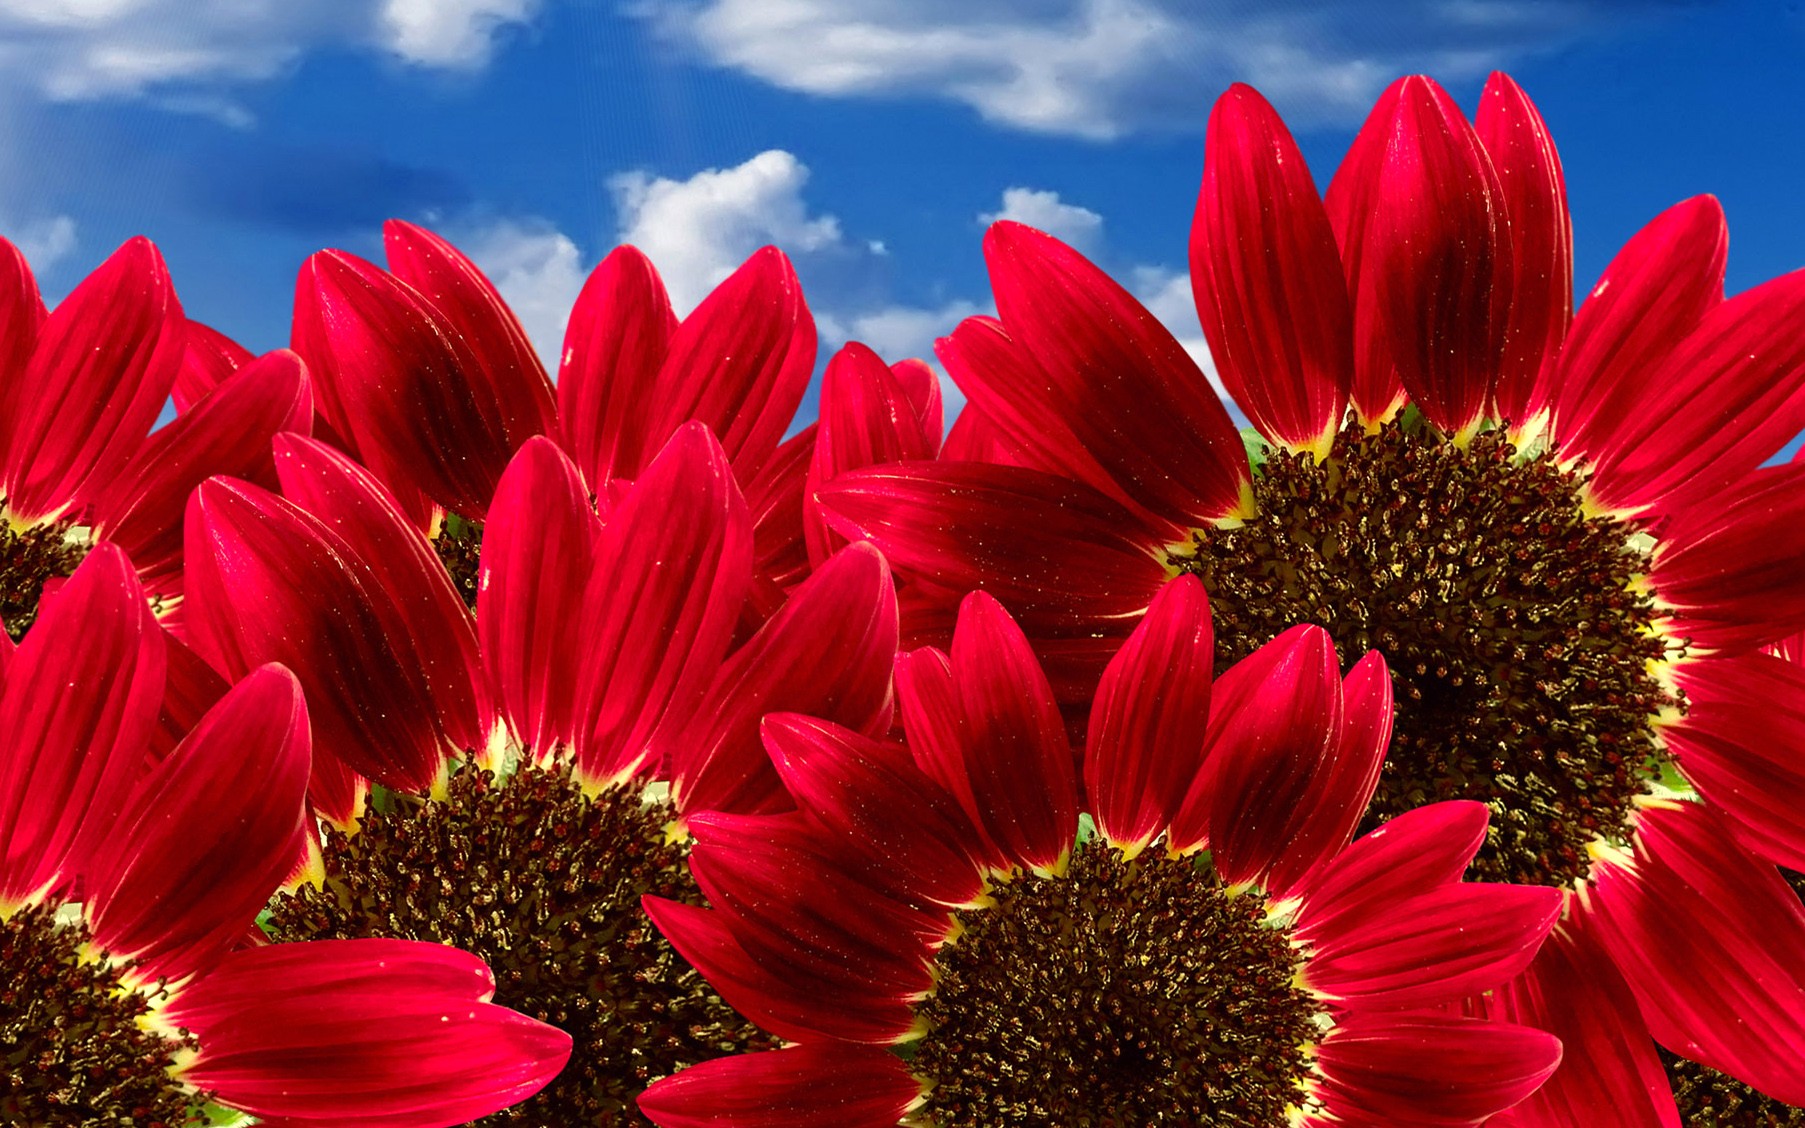 Pure Red Sunflowers Flower Wallpaper Nature Image Plants